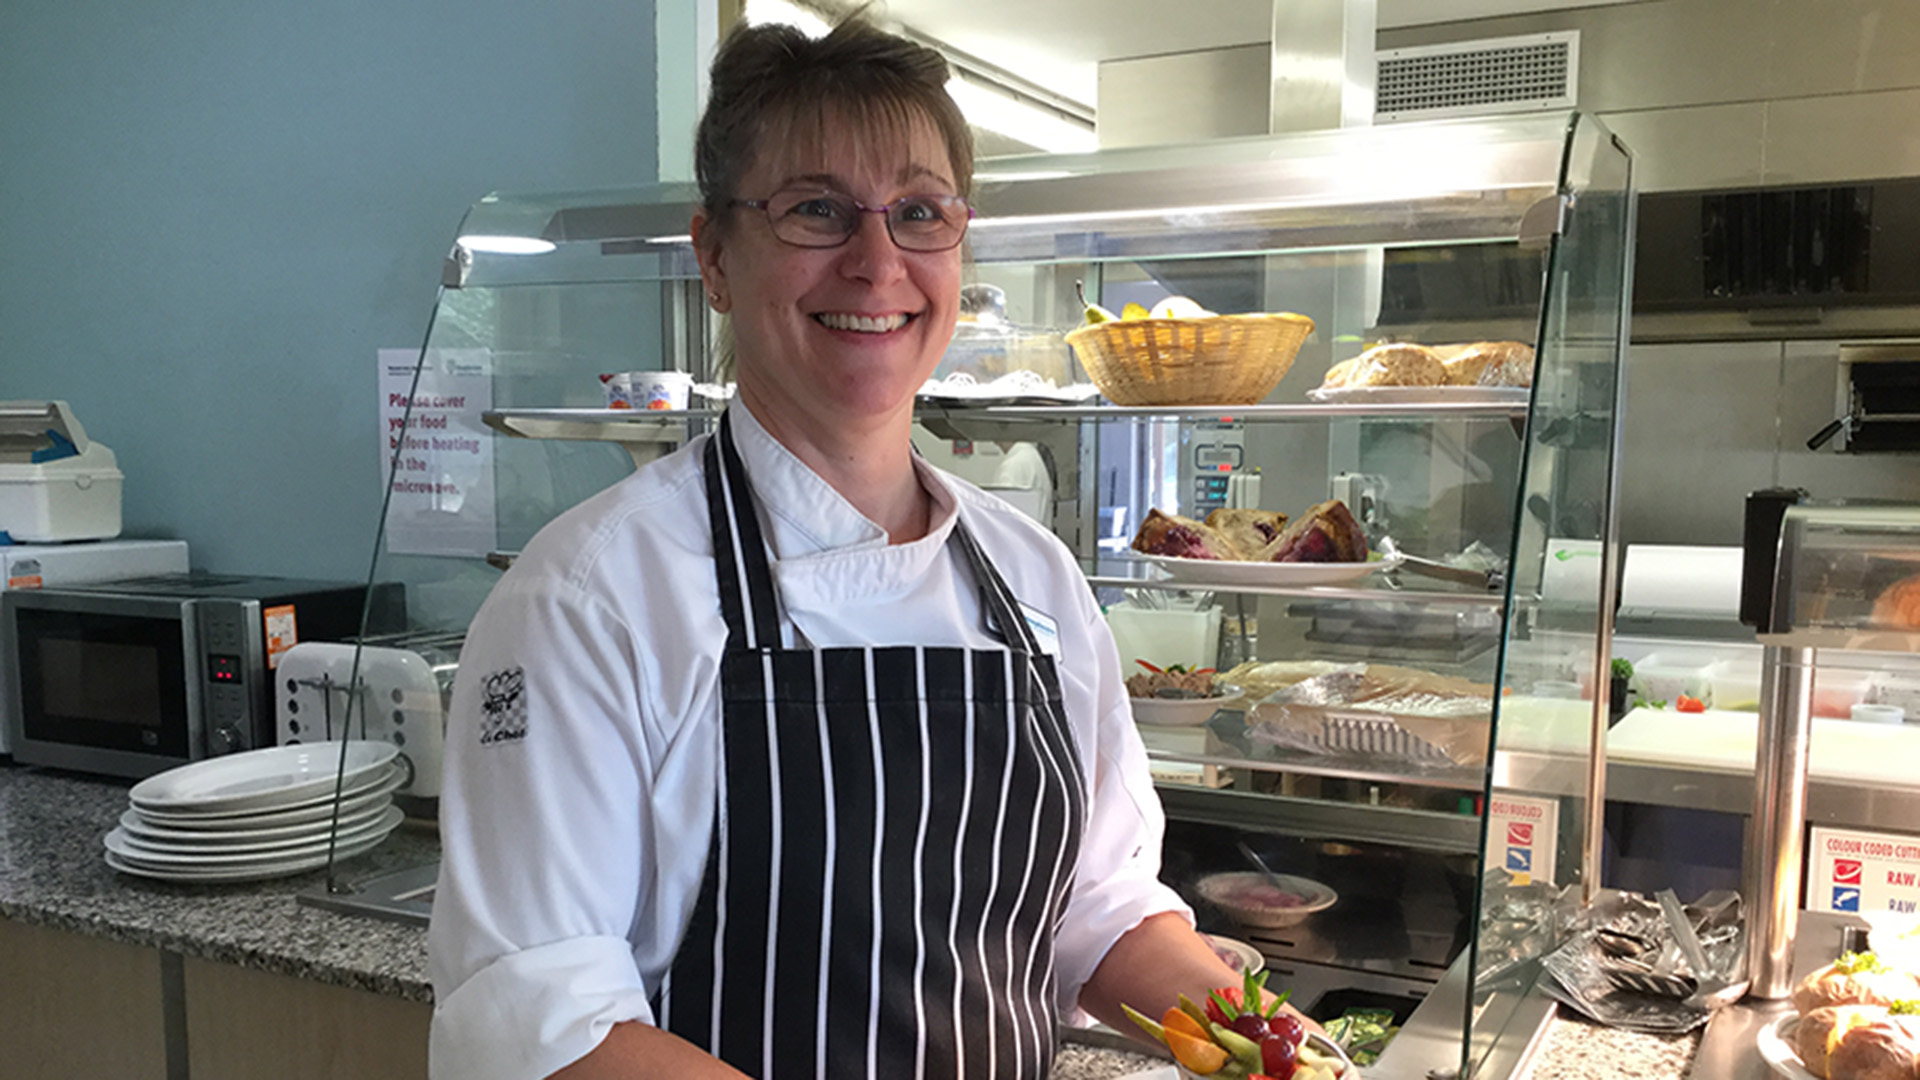 Meet Hospiscare's Chef Manager